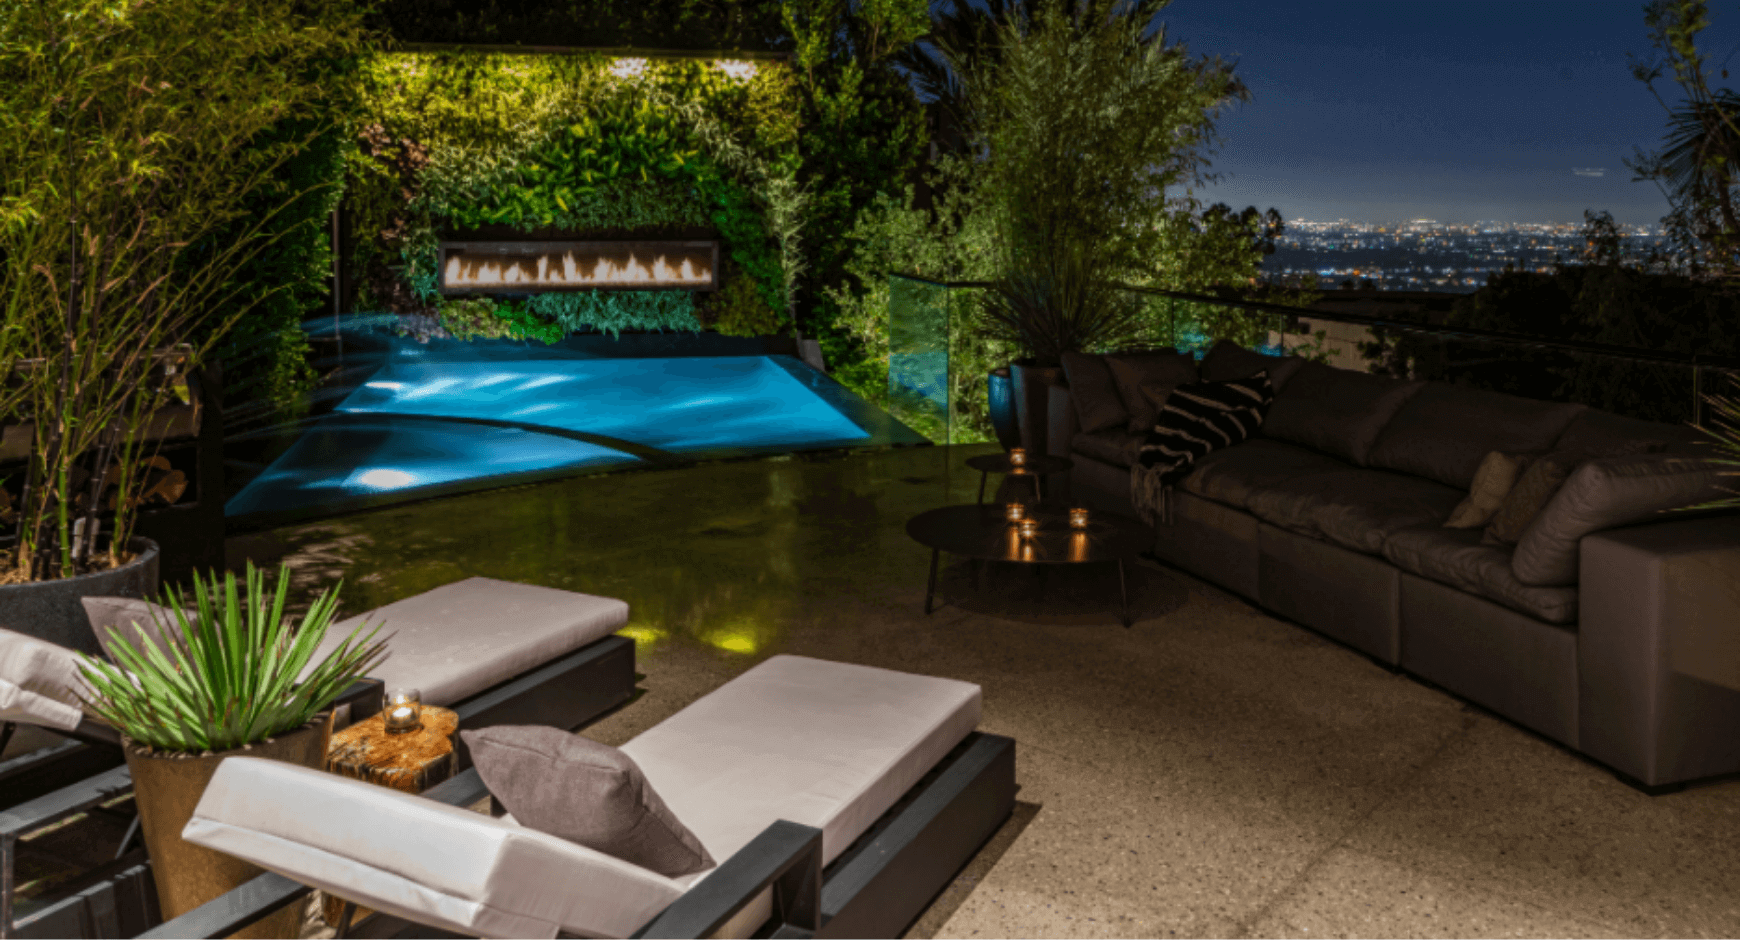 Linear poolside fireplace at night overlooking a city